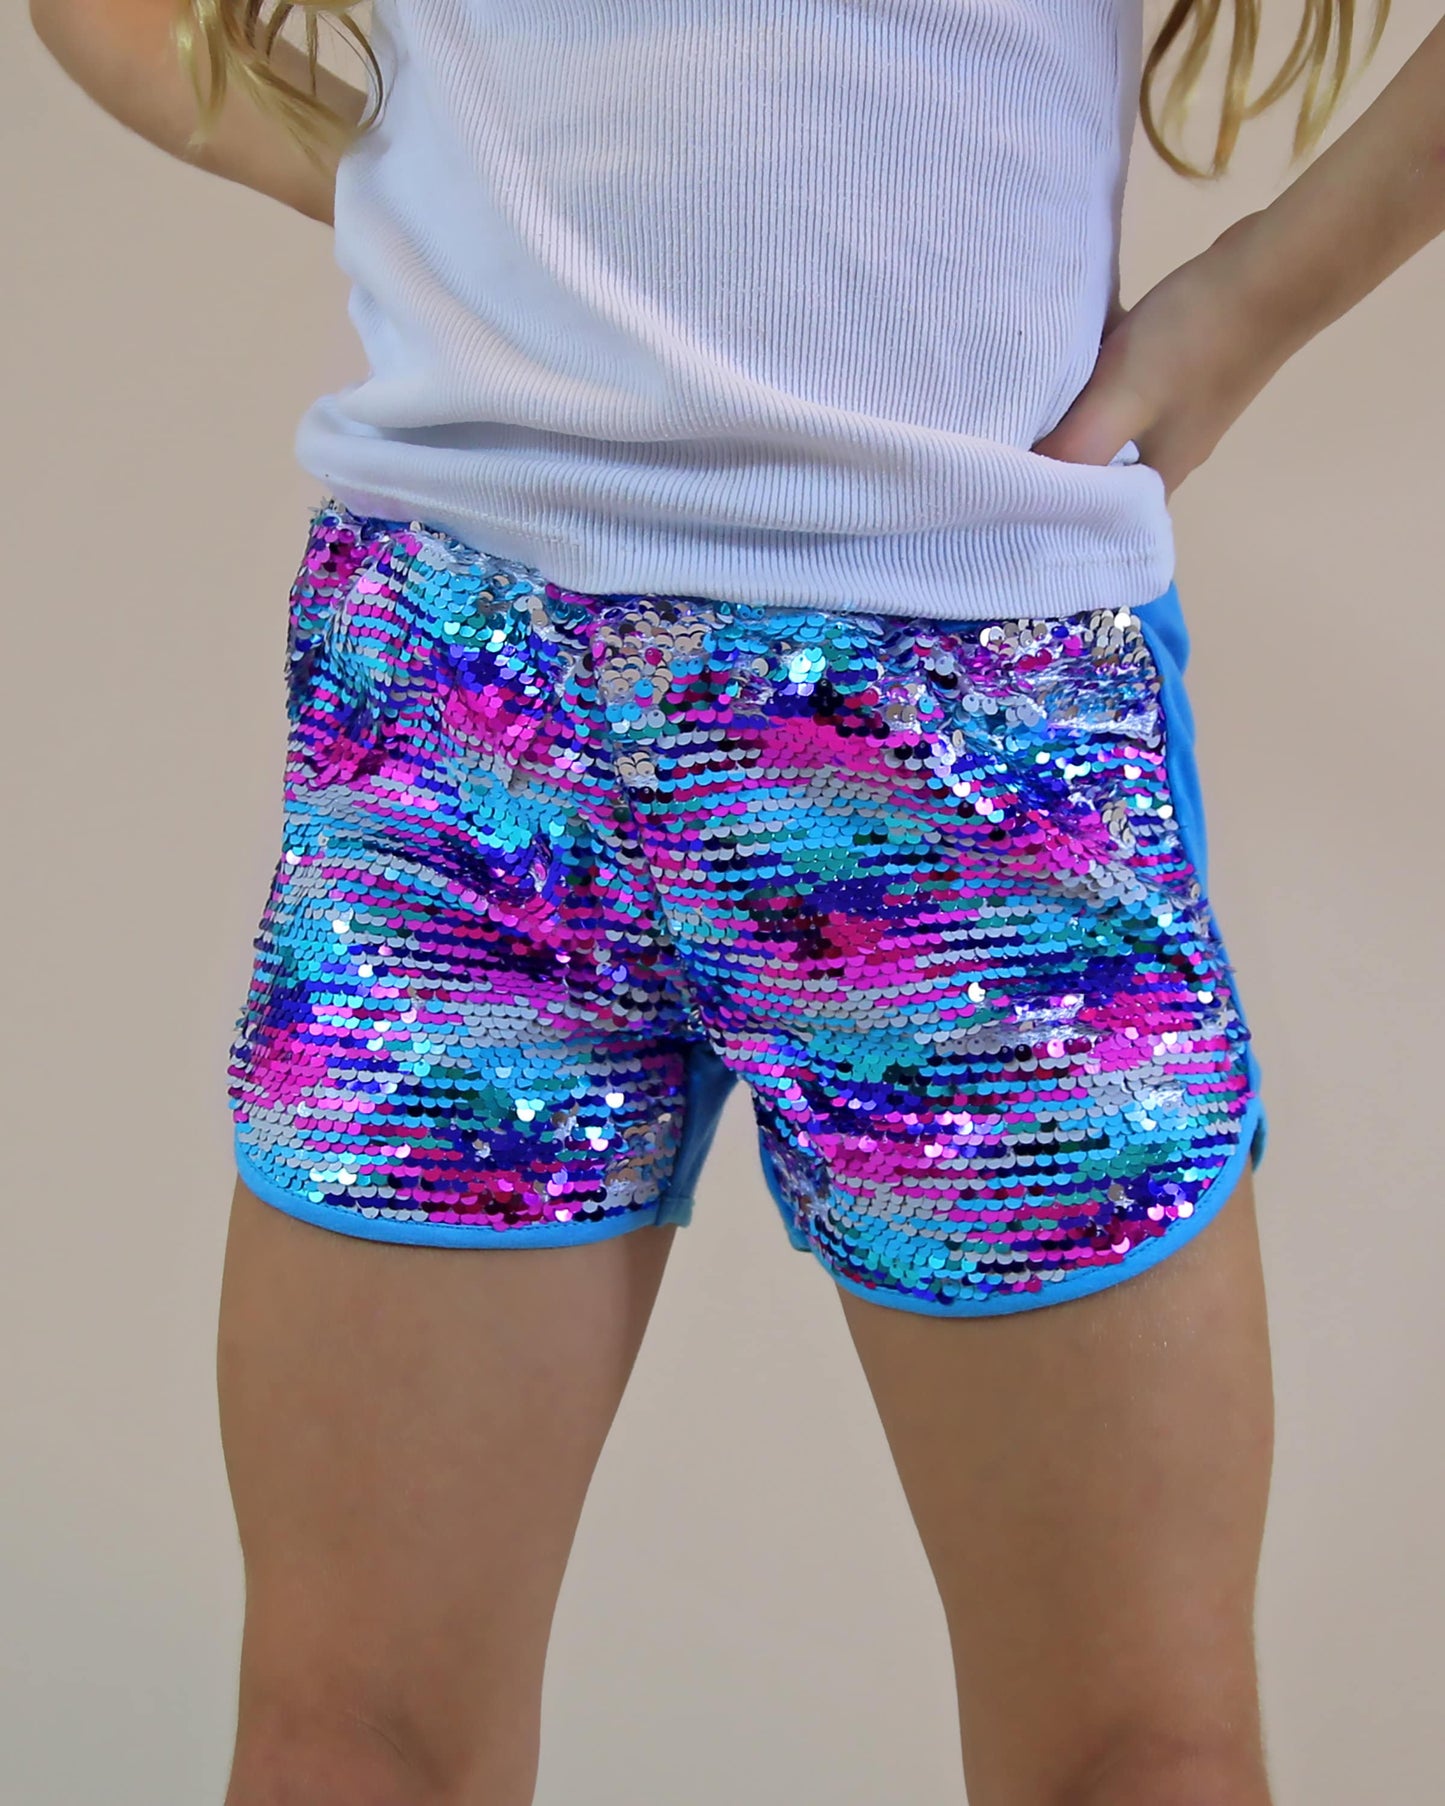 Flip Sequin Shorts in Turquoise and Hot Pink Mix